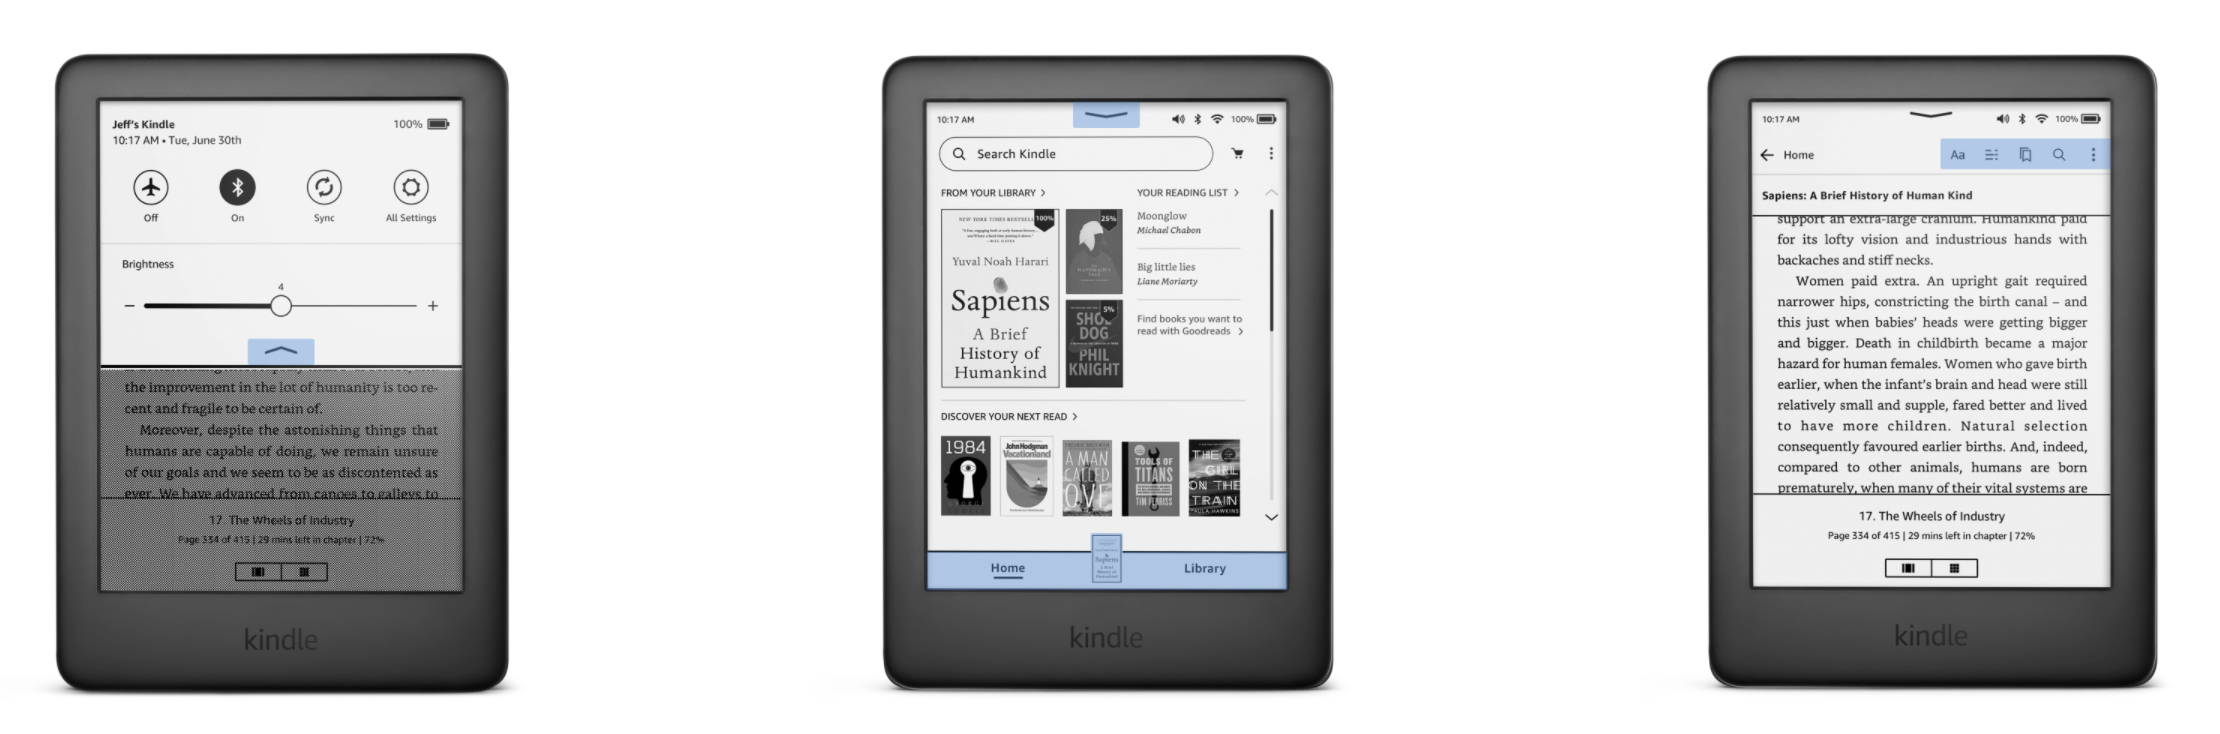 Amazon releases a Kindle software redesign to make navigation easier